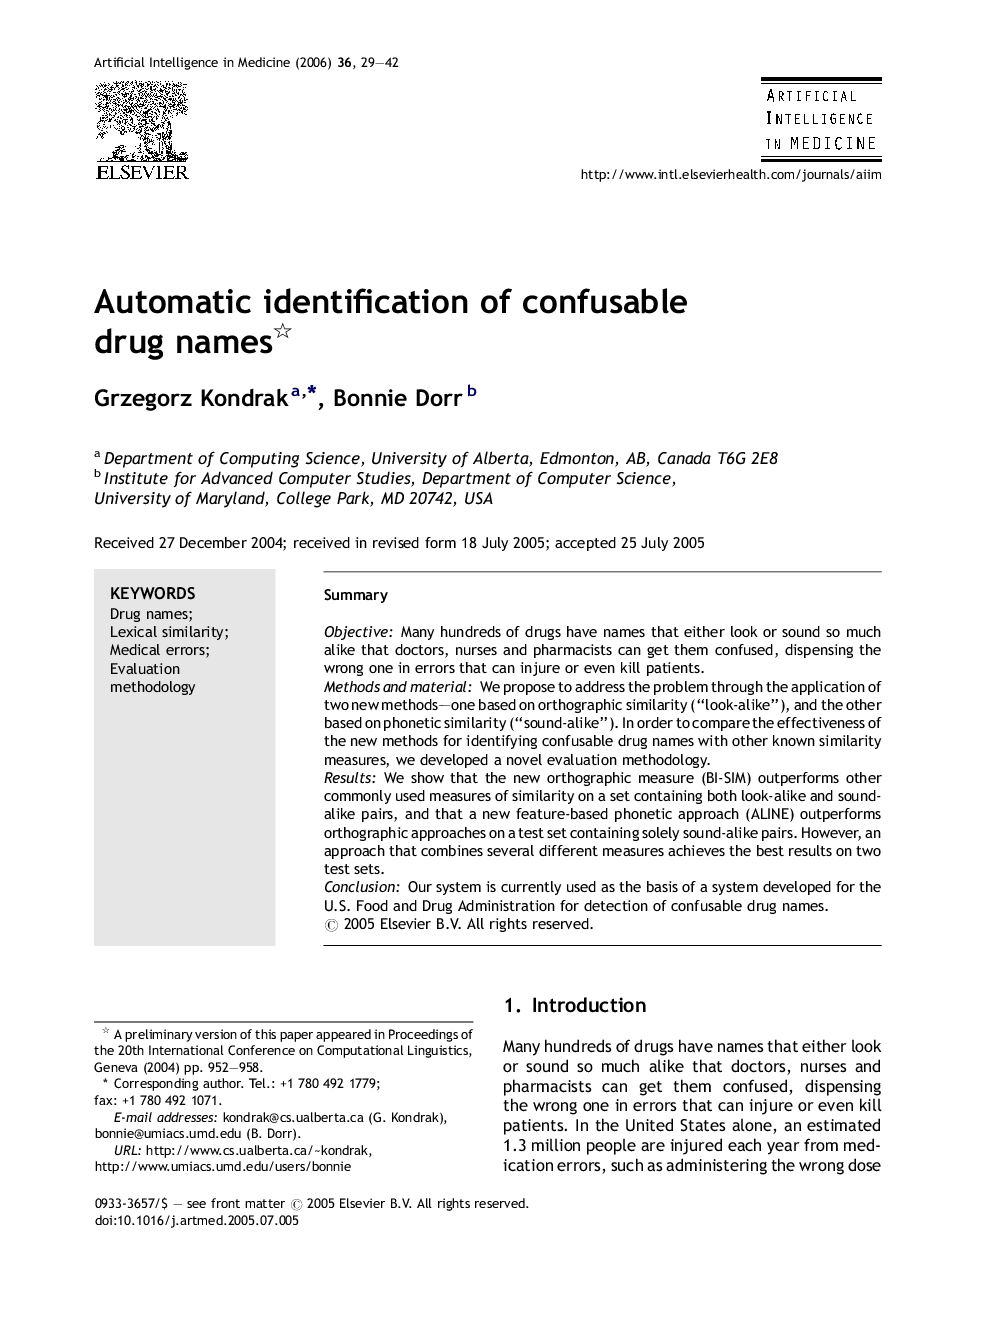 Automatic identification of confusable drug names 